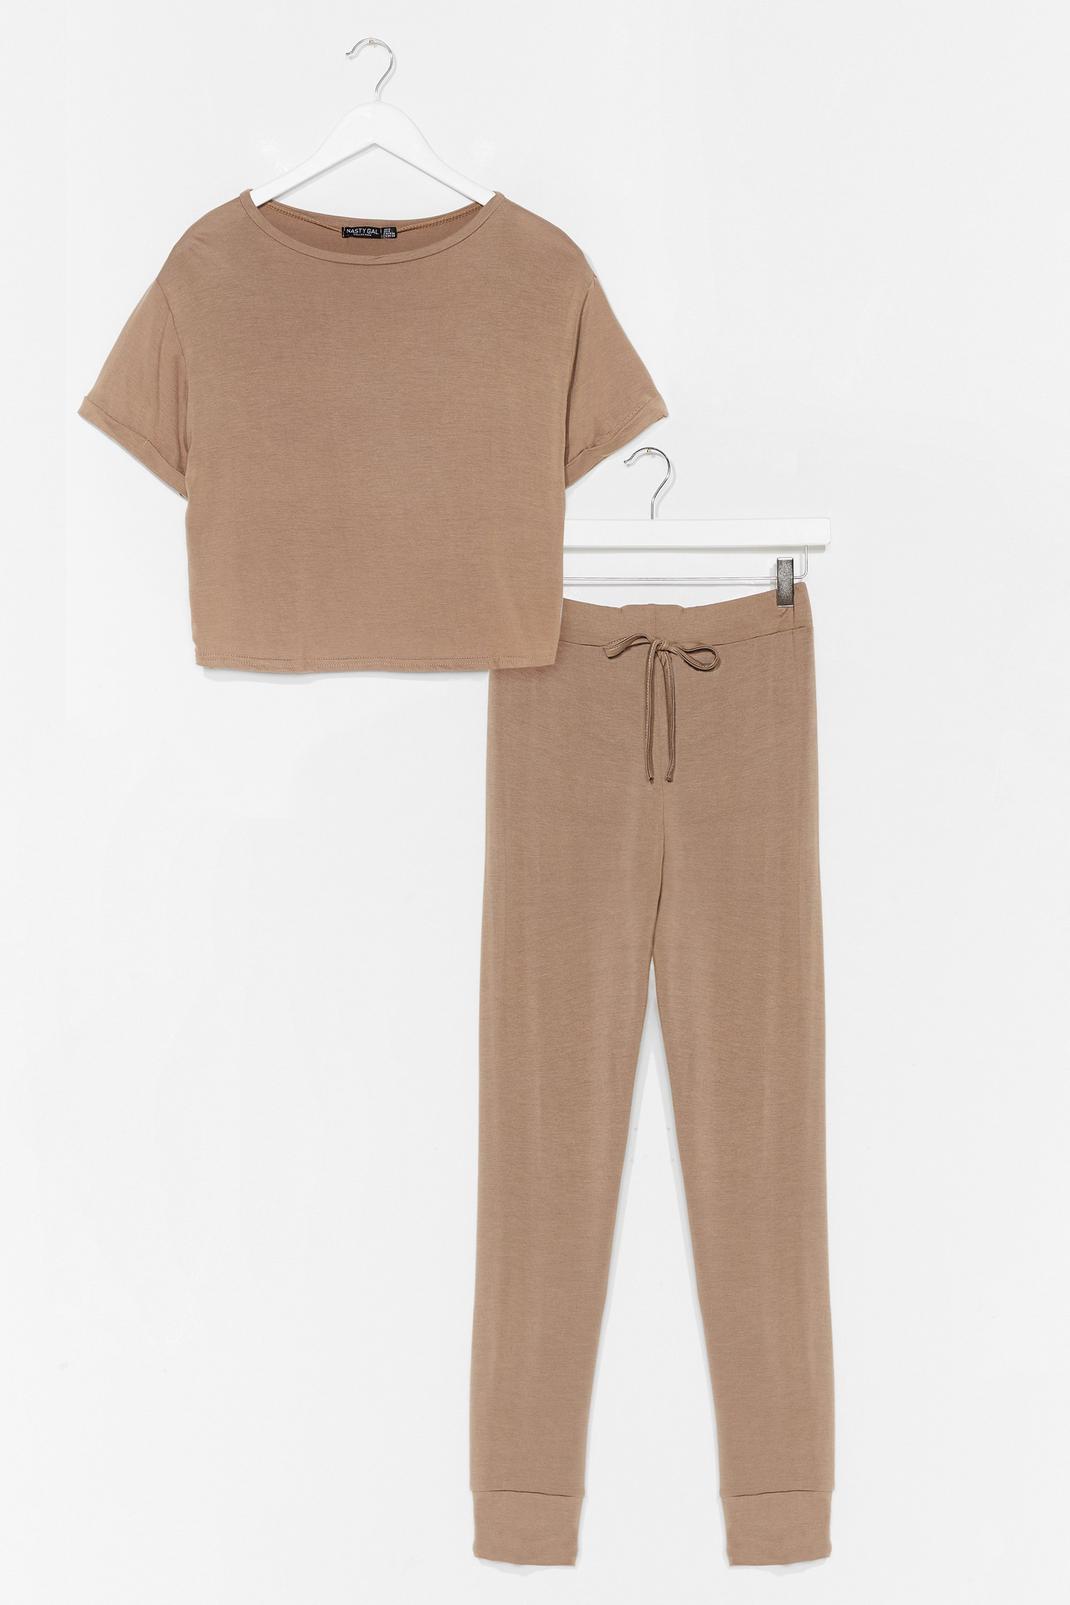 Sand T-Shirt and Fitted Tracksuit Pants Pyjama Set image number 1